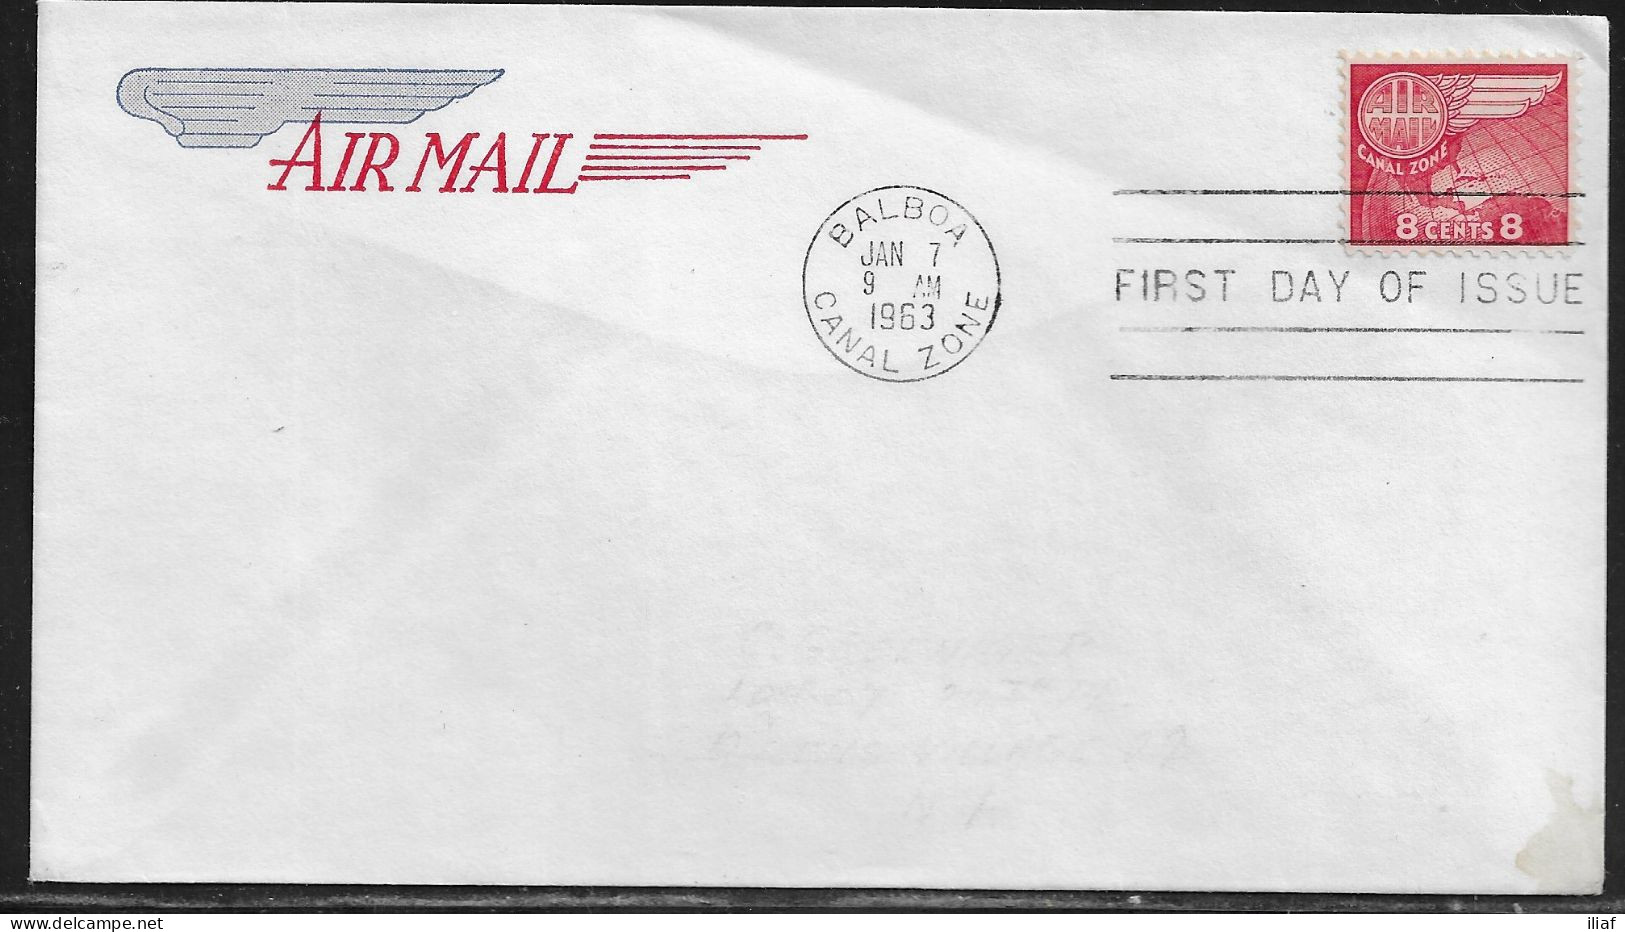 Canal Zone. FDC Sc. C34.   Airmail Globe And Wing.  FDC Cancellation On Cachet FDC Envelope - Canal Zone